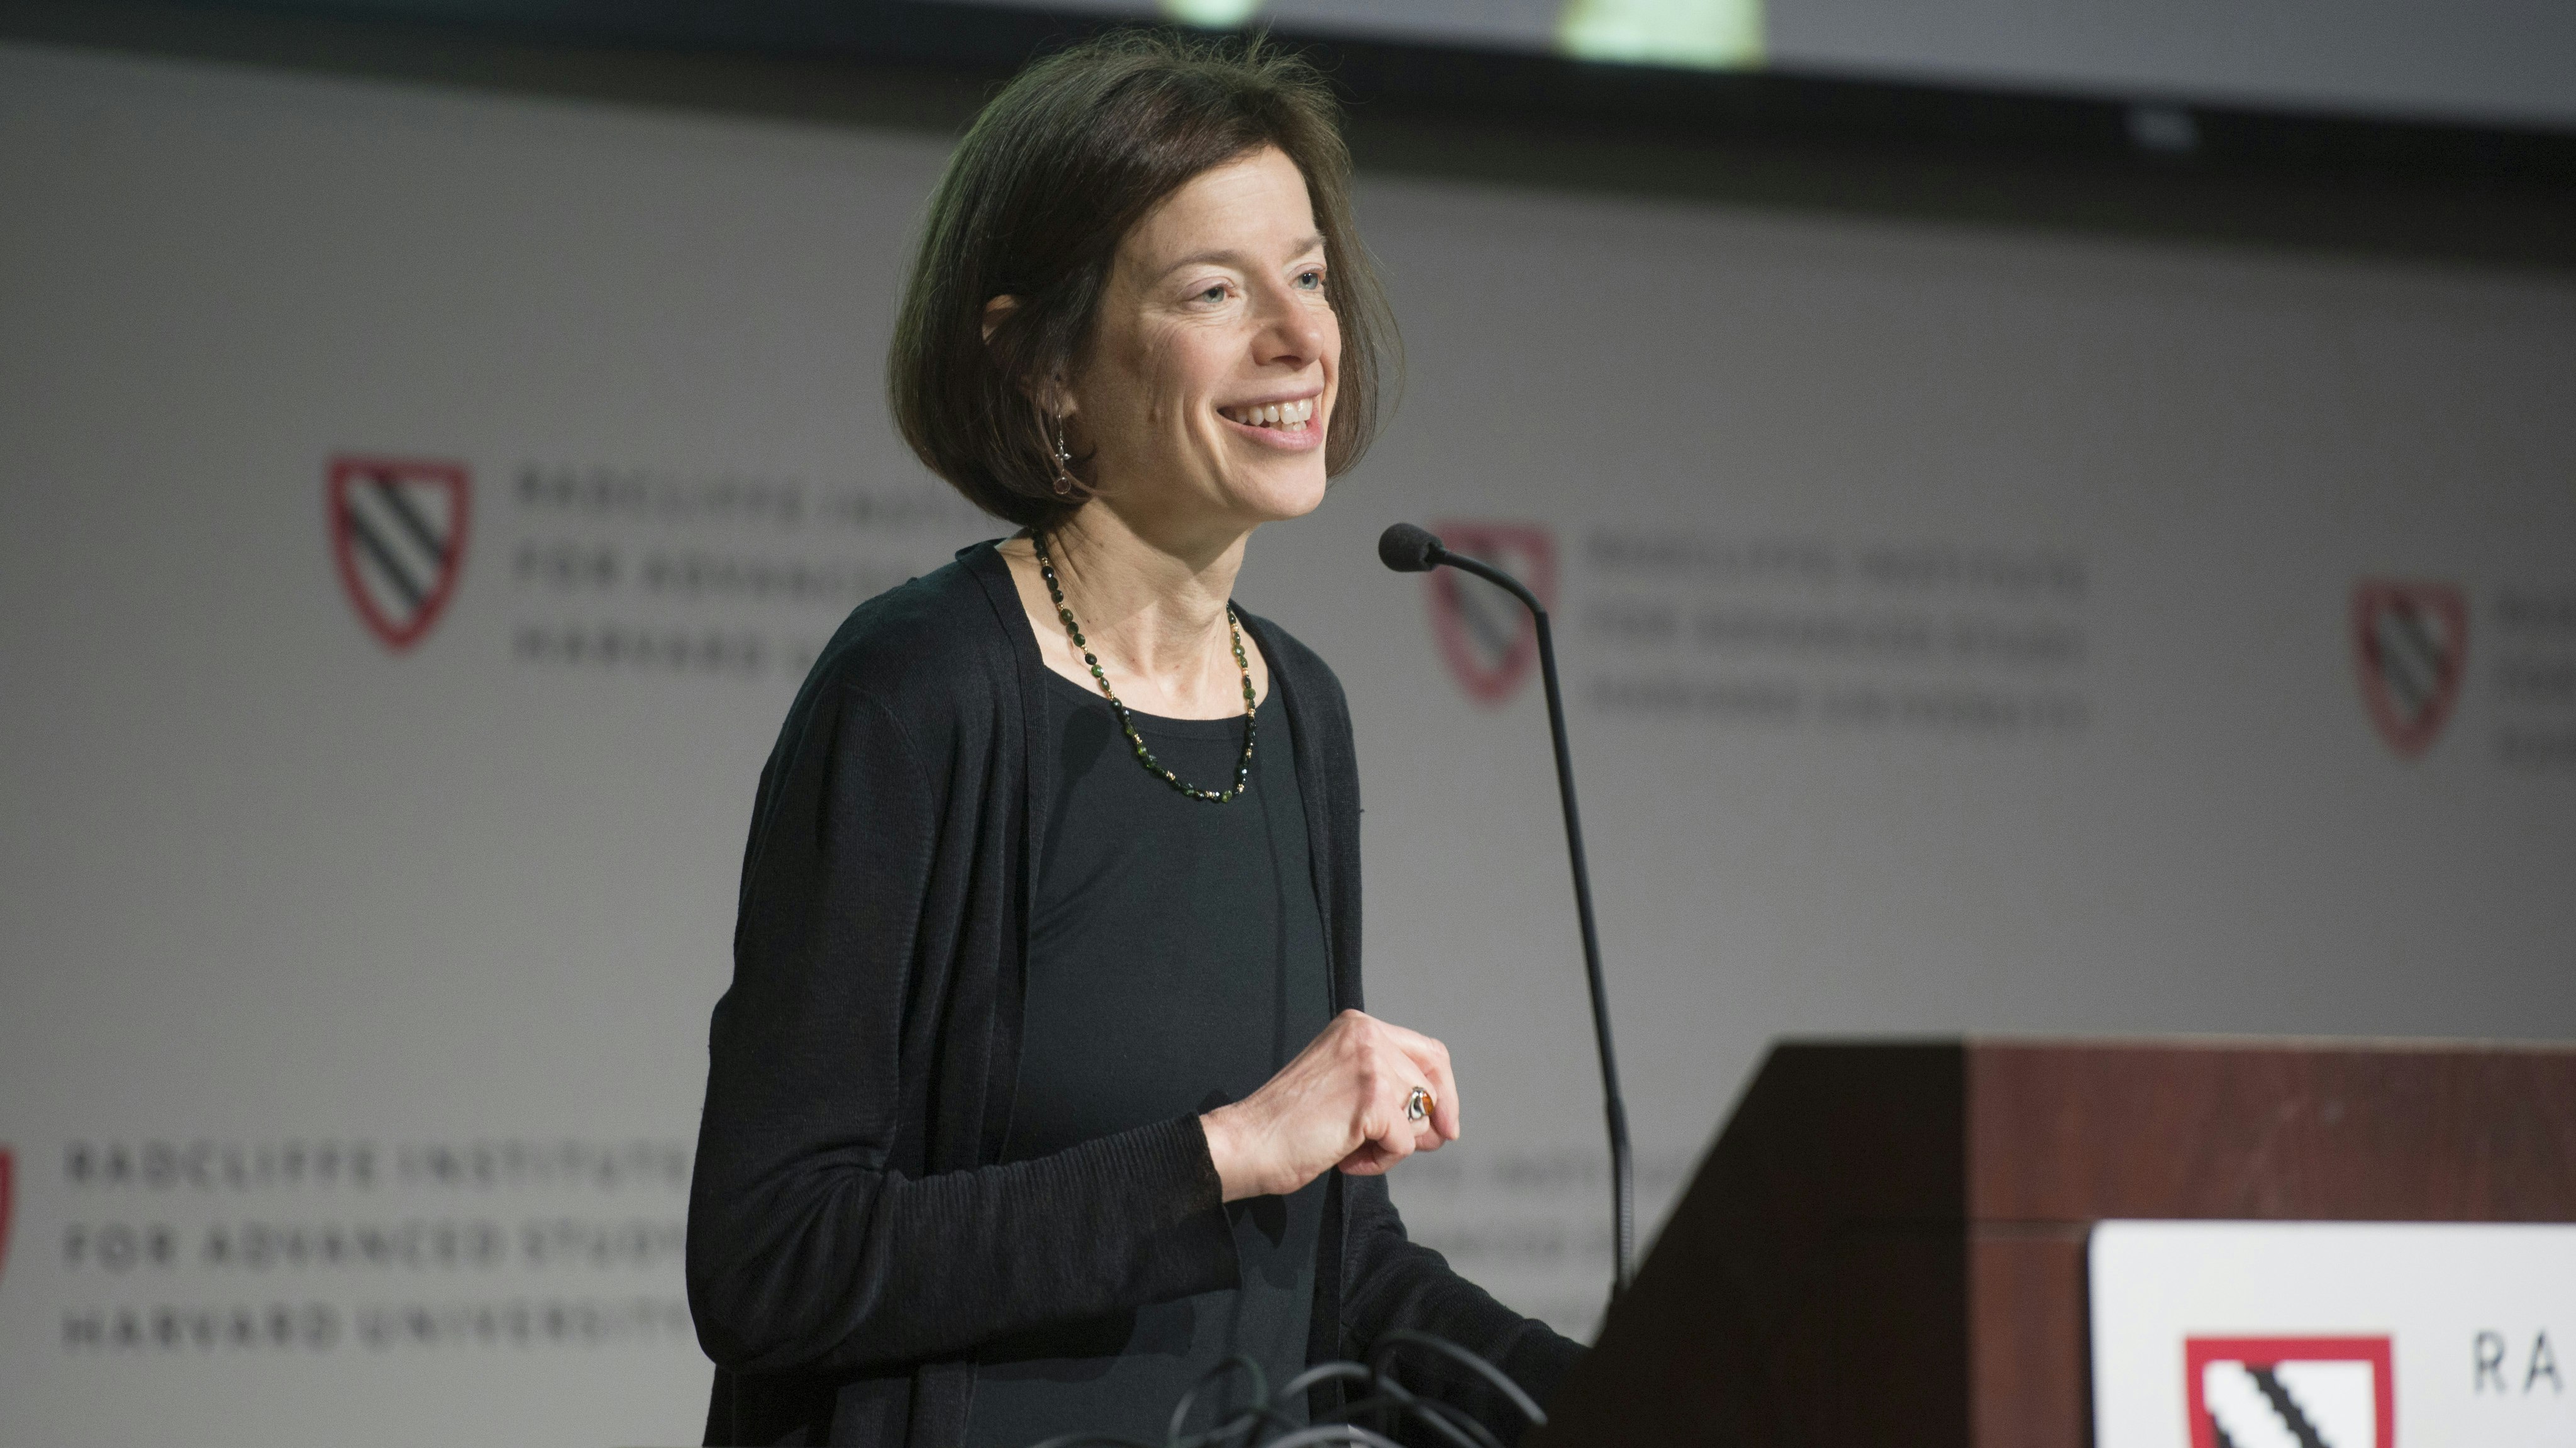 Susan Faludi speaking at Radcliffe's "Hidden in Plain Sight" panel discussion.